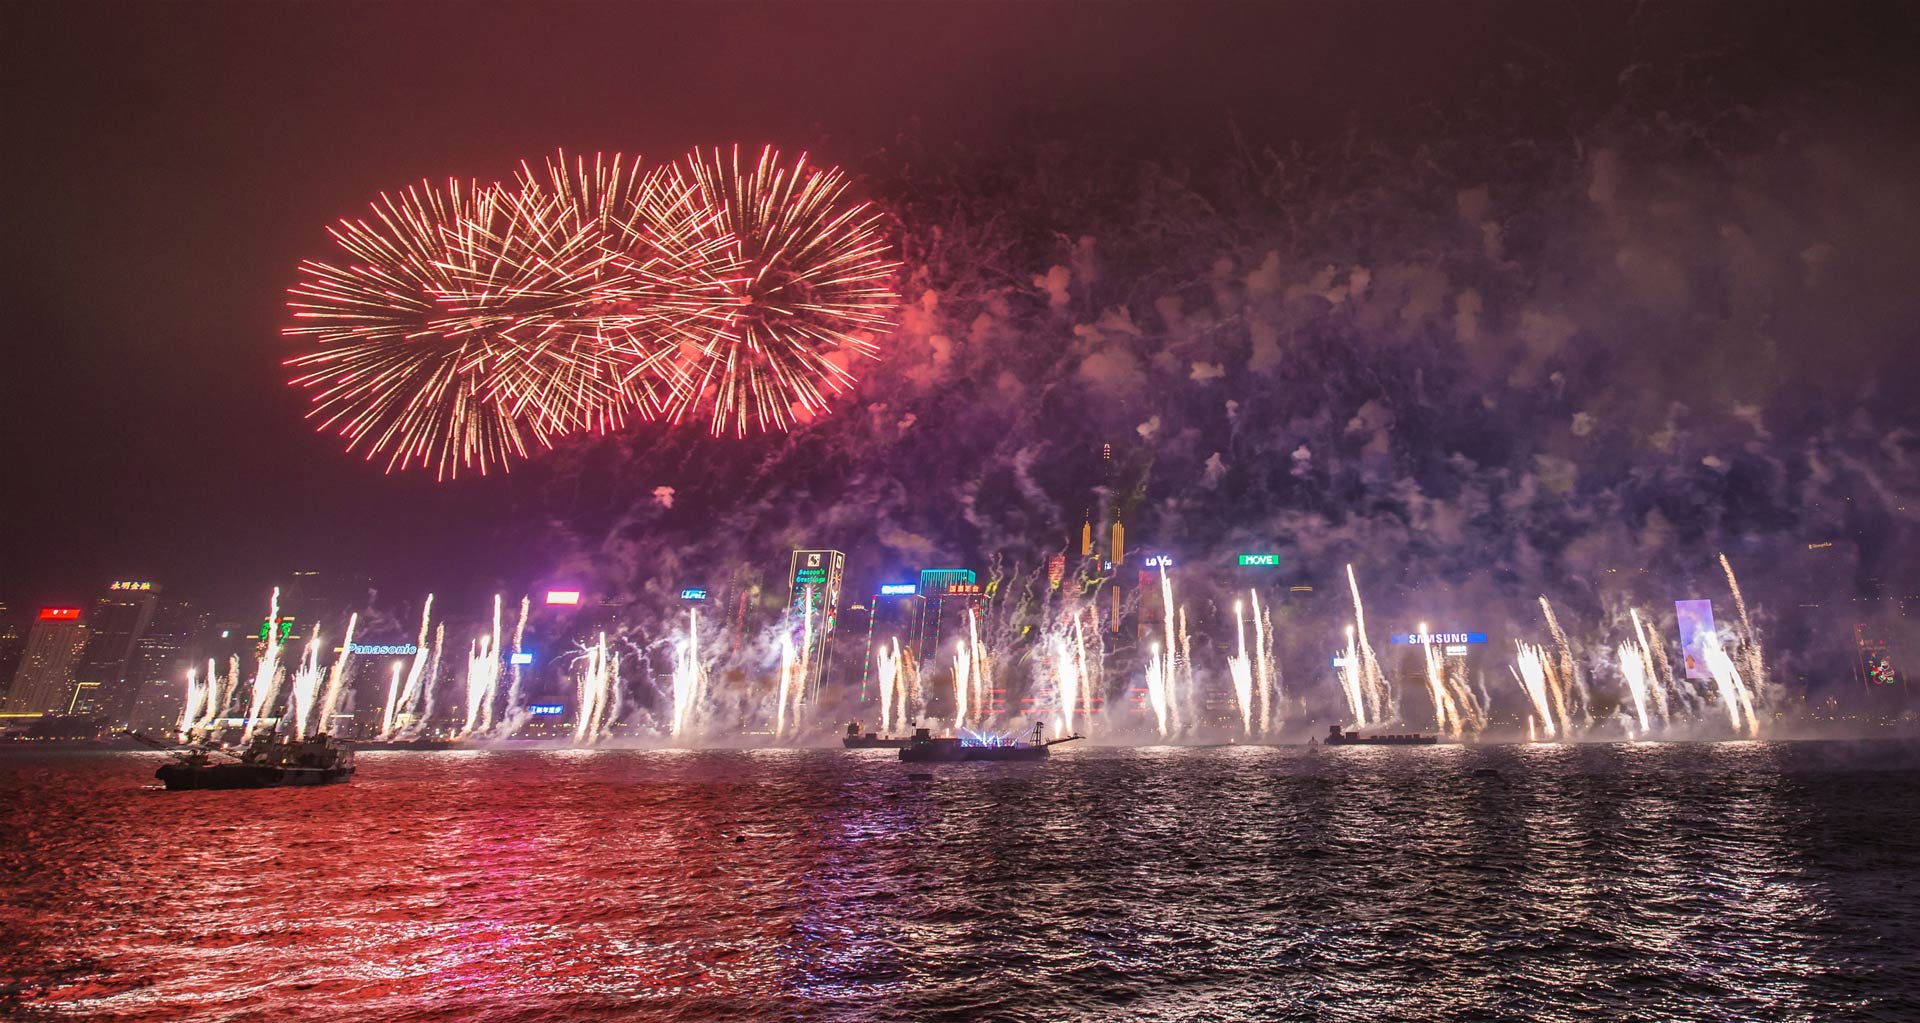 National Day Fireworks Over Victoria Harbor in Hong Kong, China